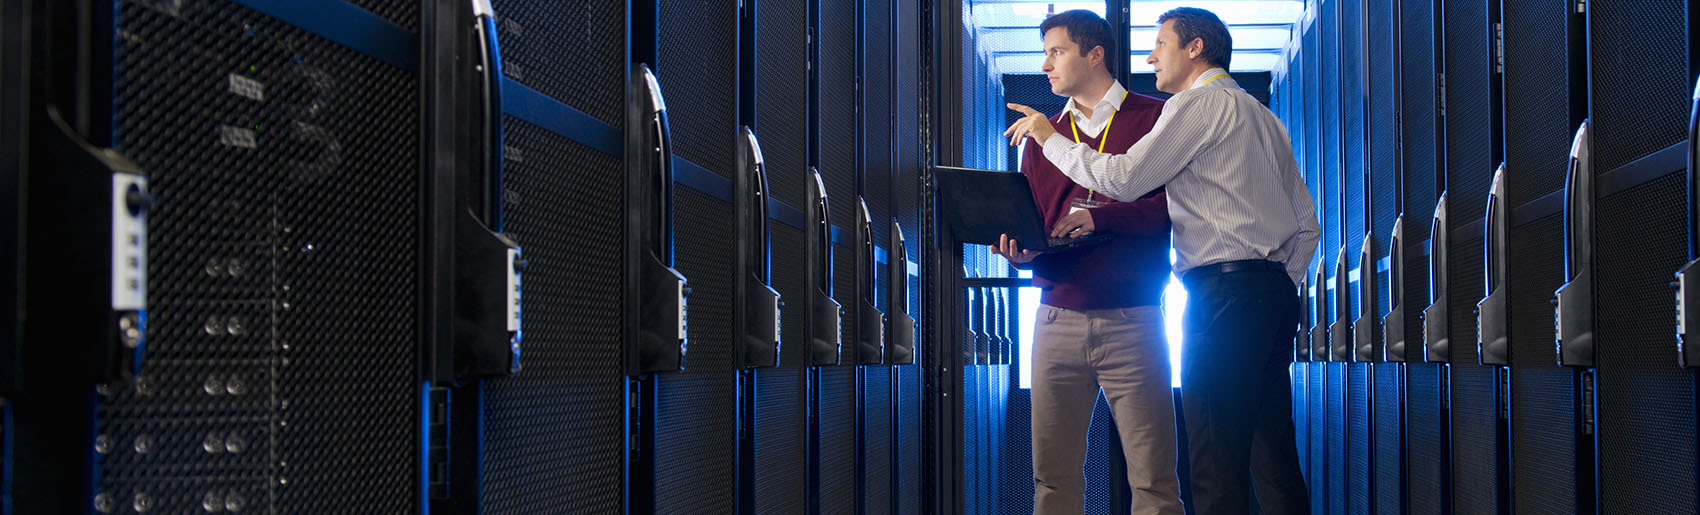 Two people standing near computer servers